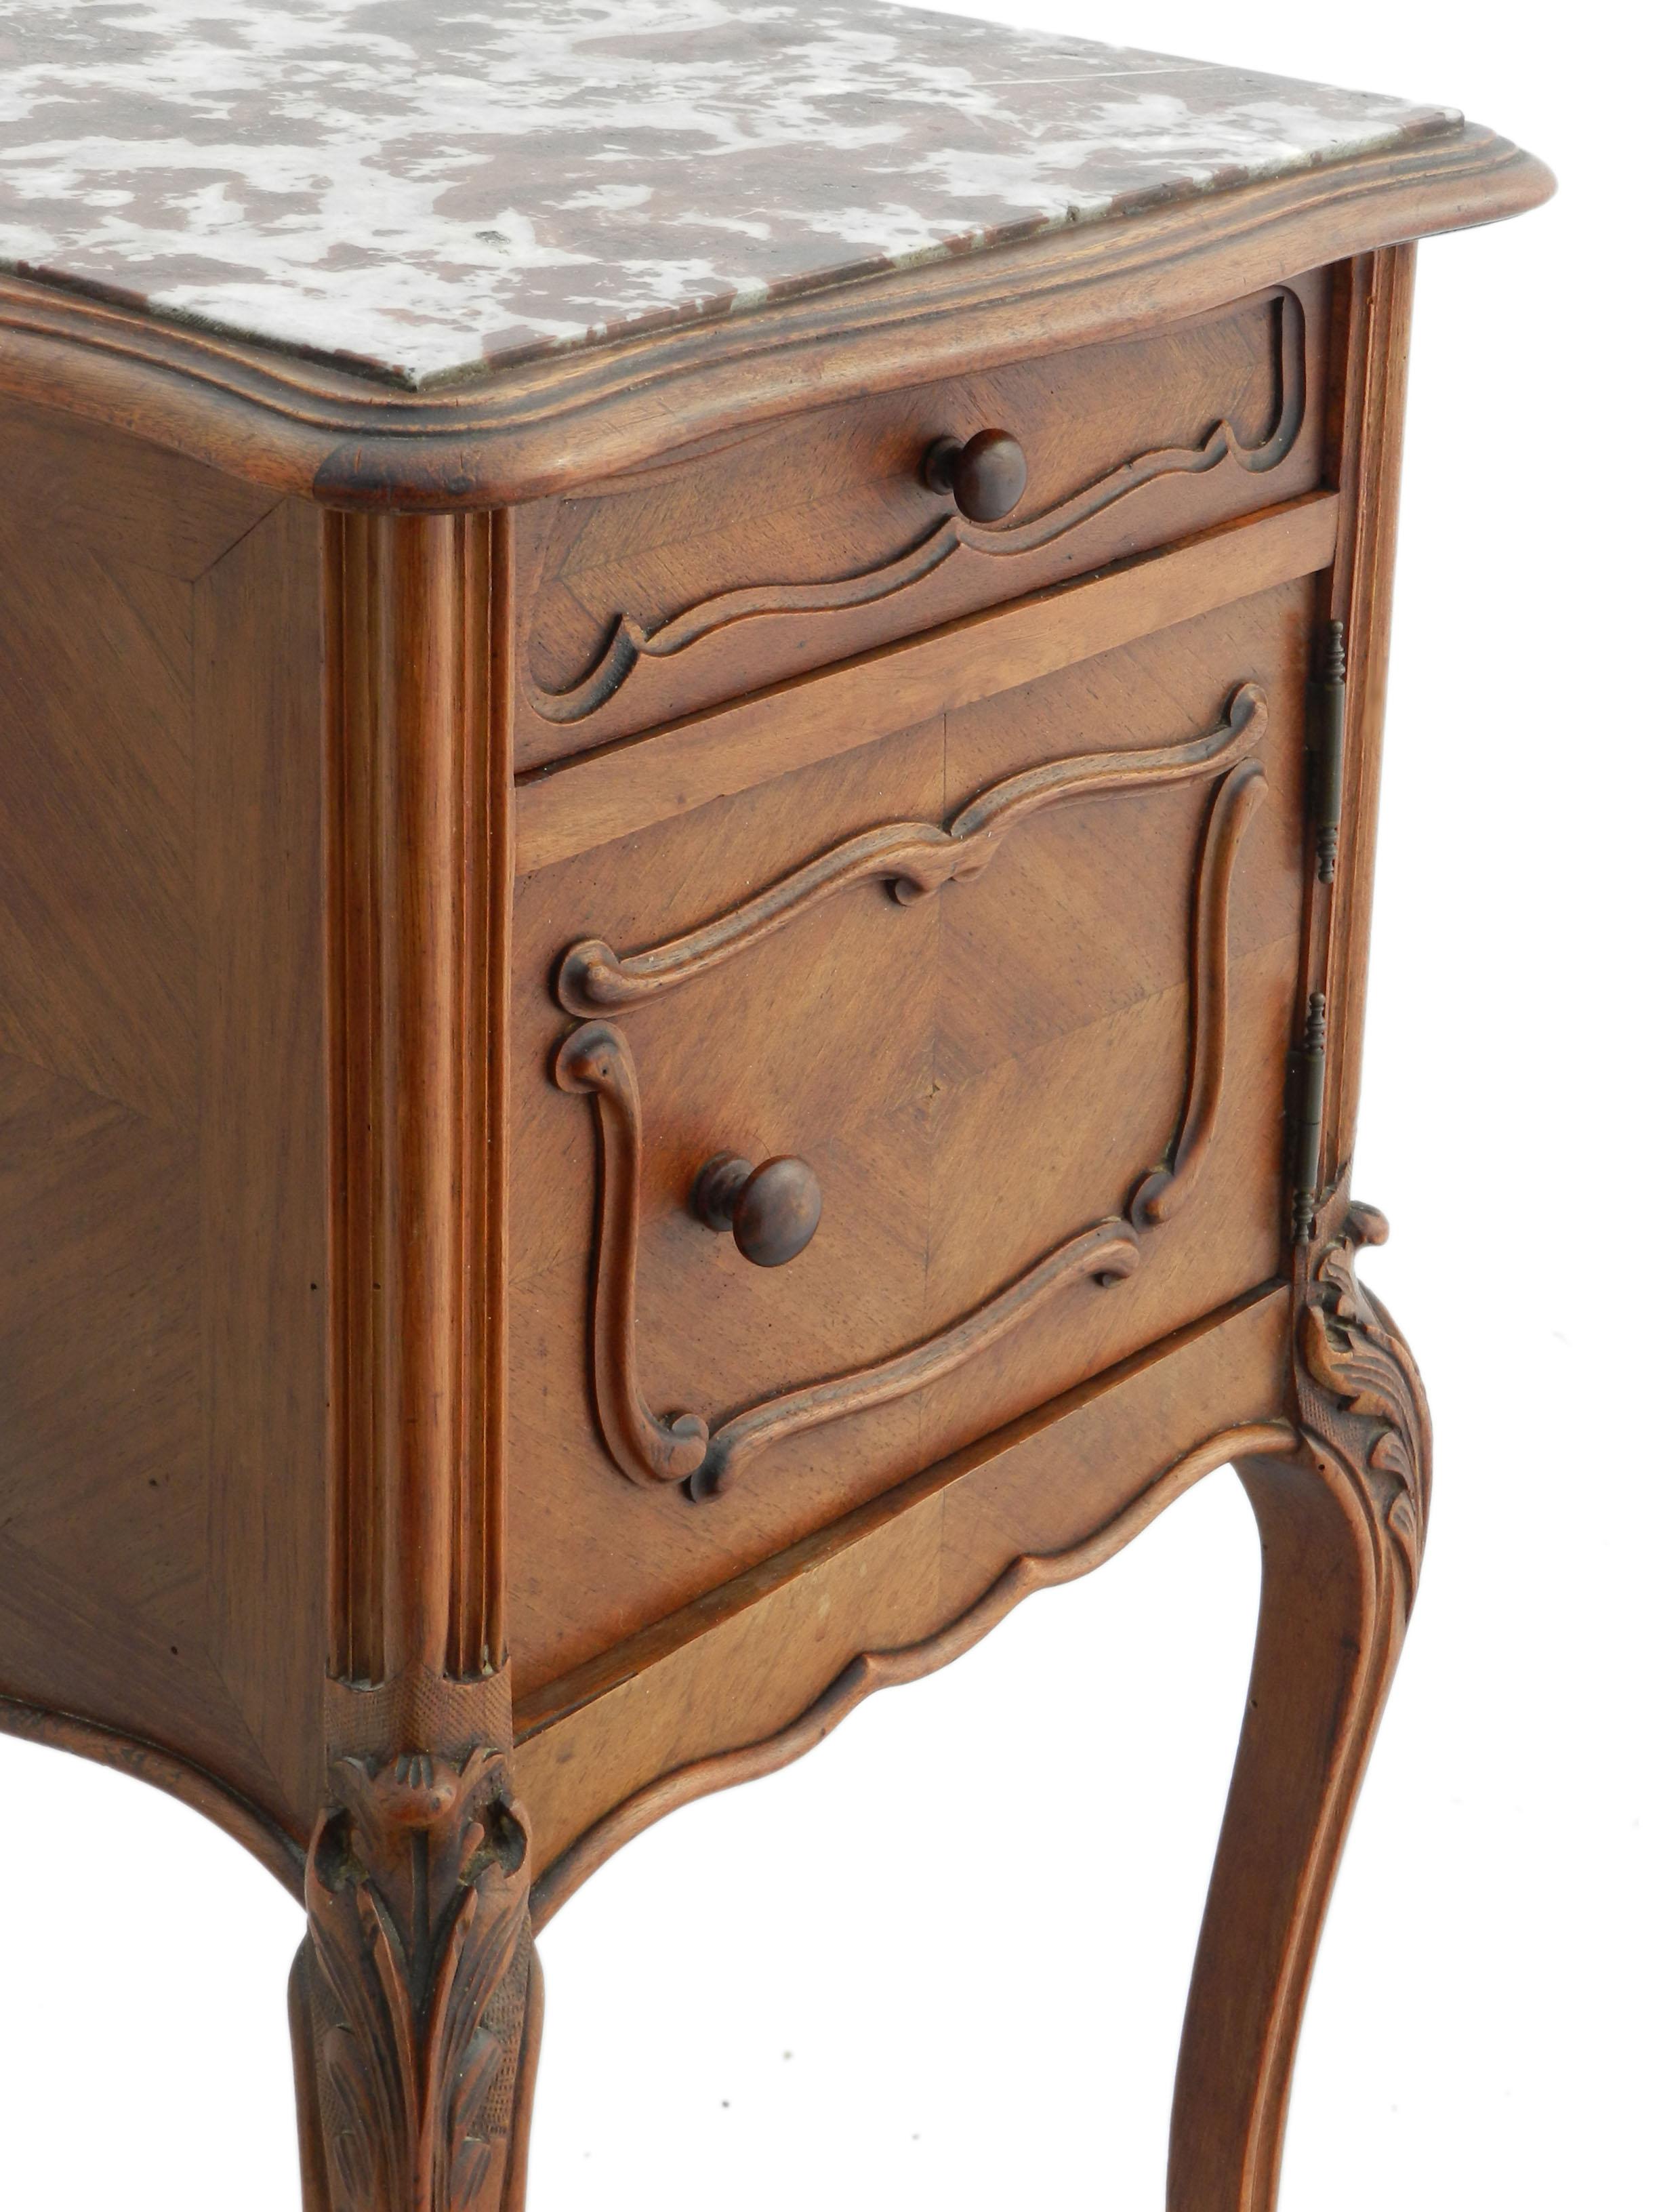 19th century side cabinet French nightstand, bedside table, circa 1880-1890
Quartered walnut 
Single drawer
Cupboard with porcelain liner that can be removed if preferred
Variegated marble top
As removed from a French Manor House
Good antique